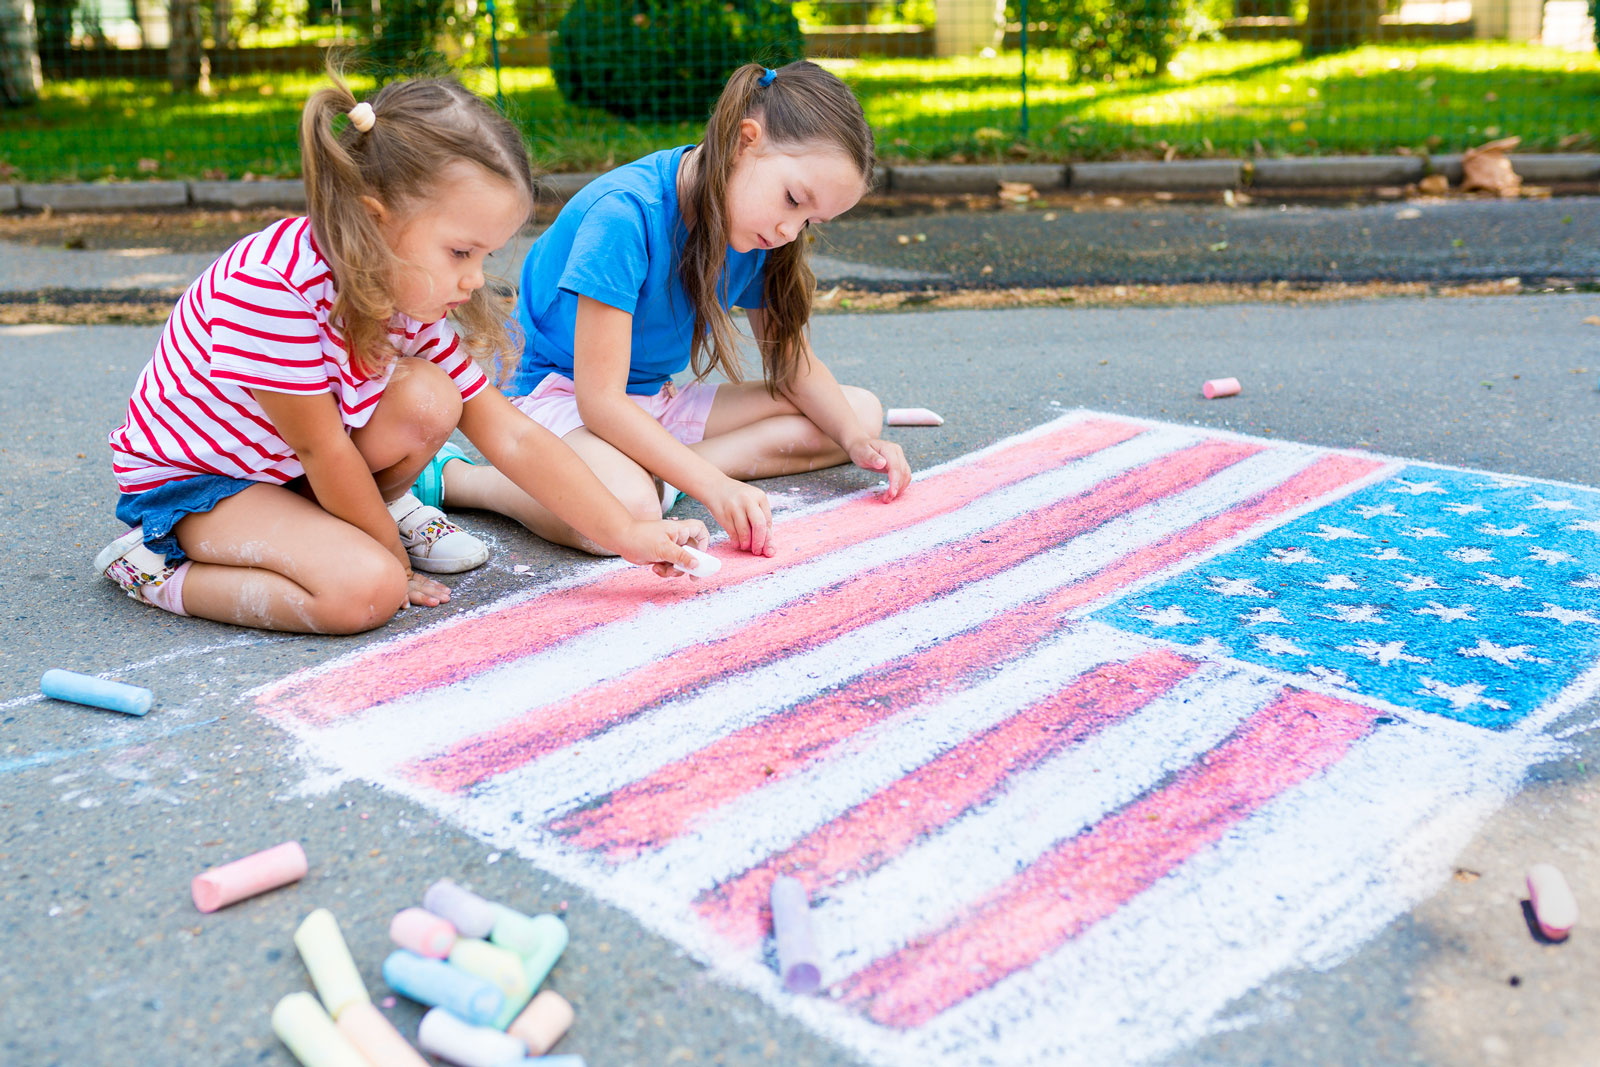 Four July 4th Decorating Projects for the Kids